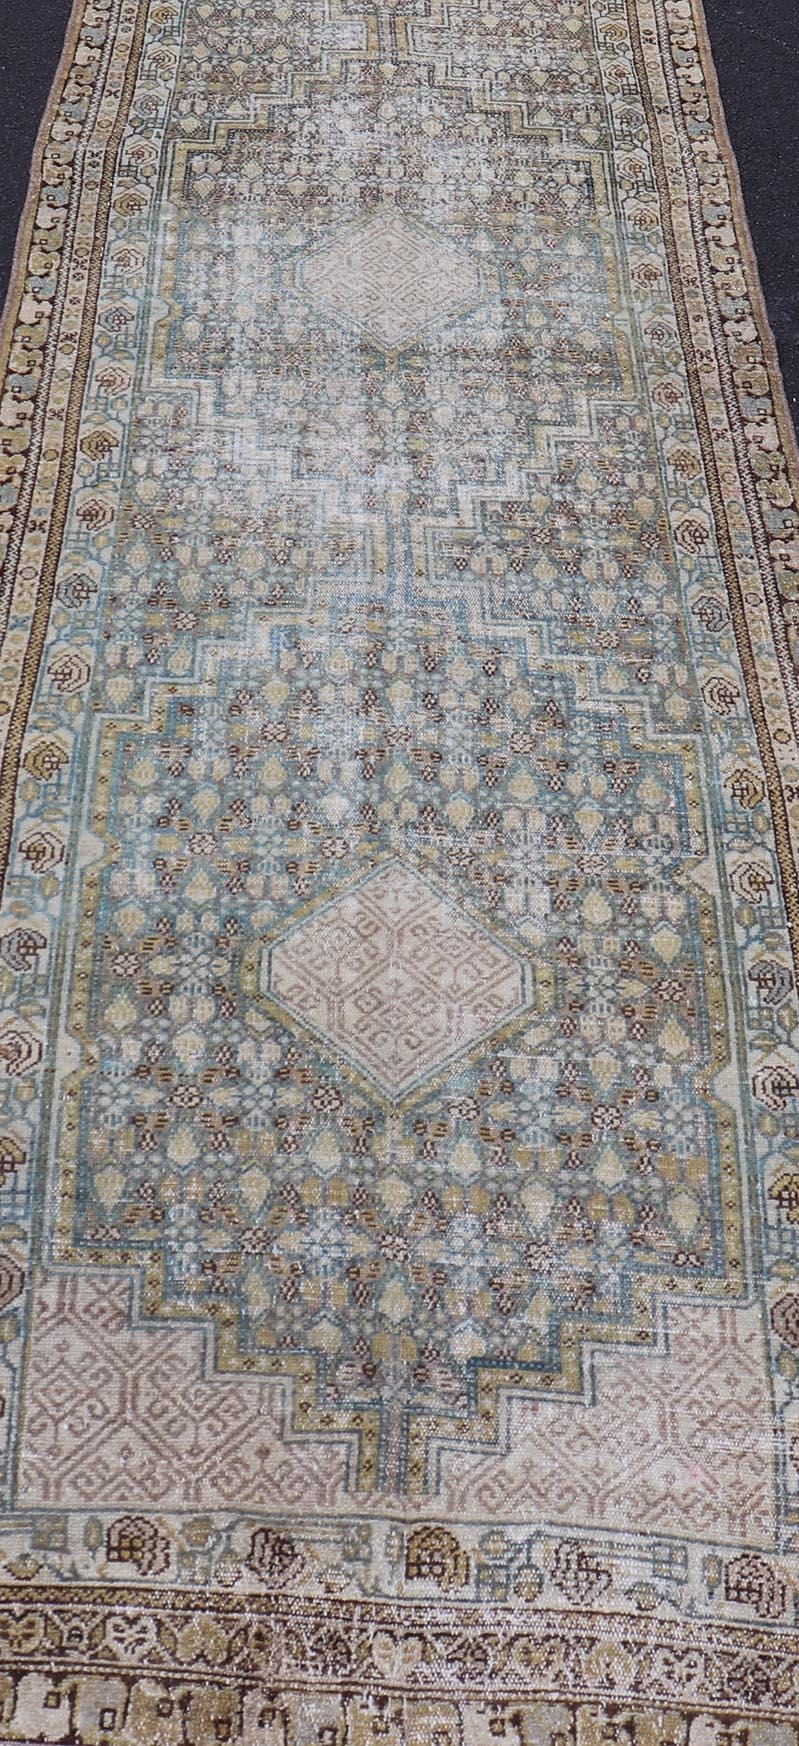 Persian Malayer Runner with Sub Geometric Medallions in Light Blue Field. Keivan Woven Arts / rug/TU-MTU-2702, country of origin / type: Iran / Malayer, circa 1920
Measures: 3'2 x 16'4 
This beautiful antique Malayer runner from Persia features an